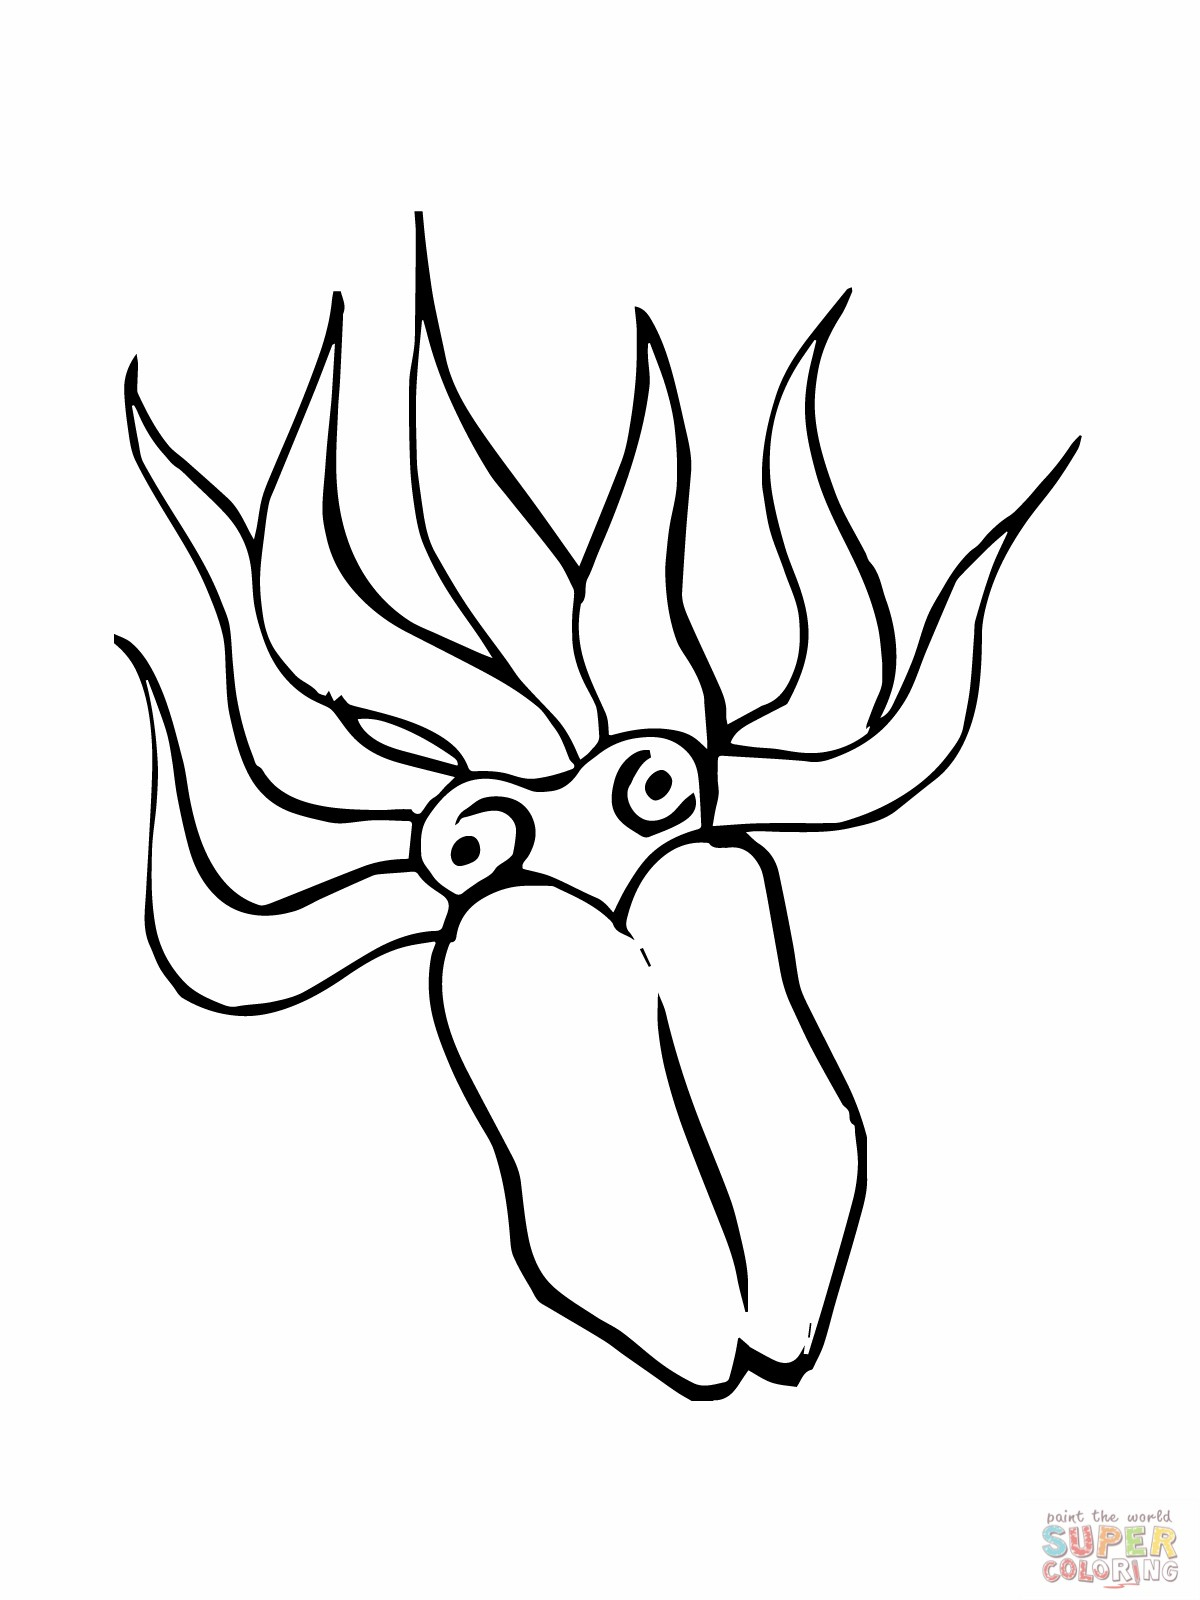 Squid Coloring Pages Printable Category Coloring Page 3 Lrcp Coloring Page